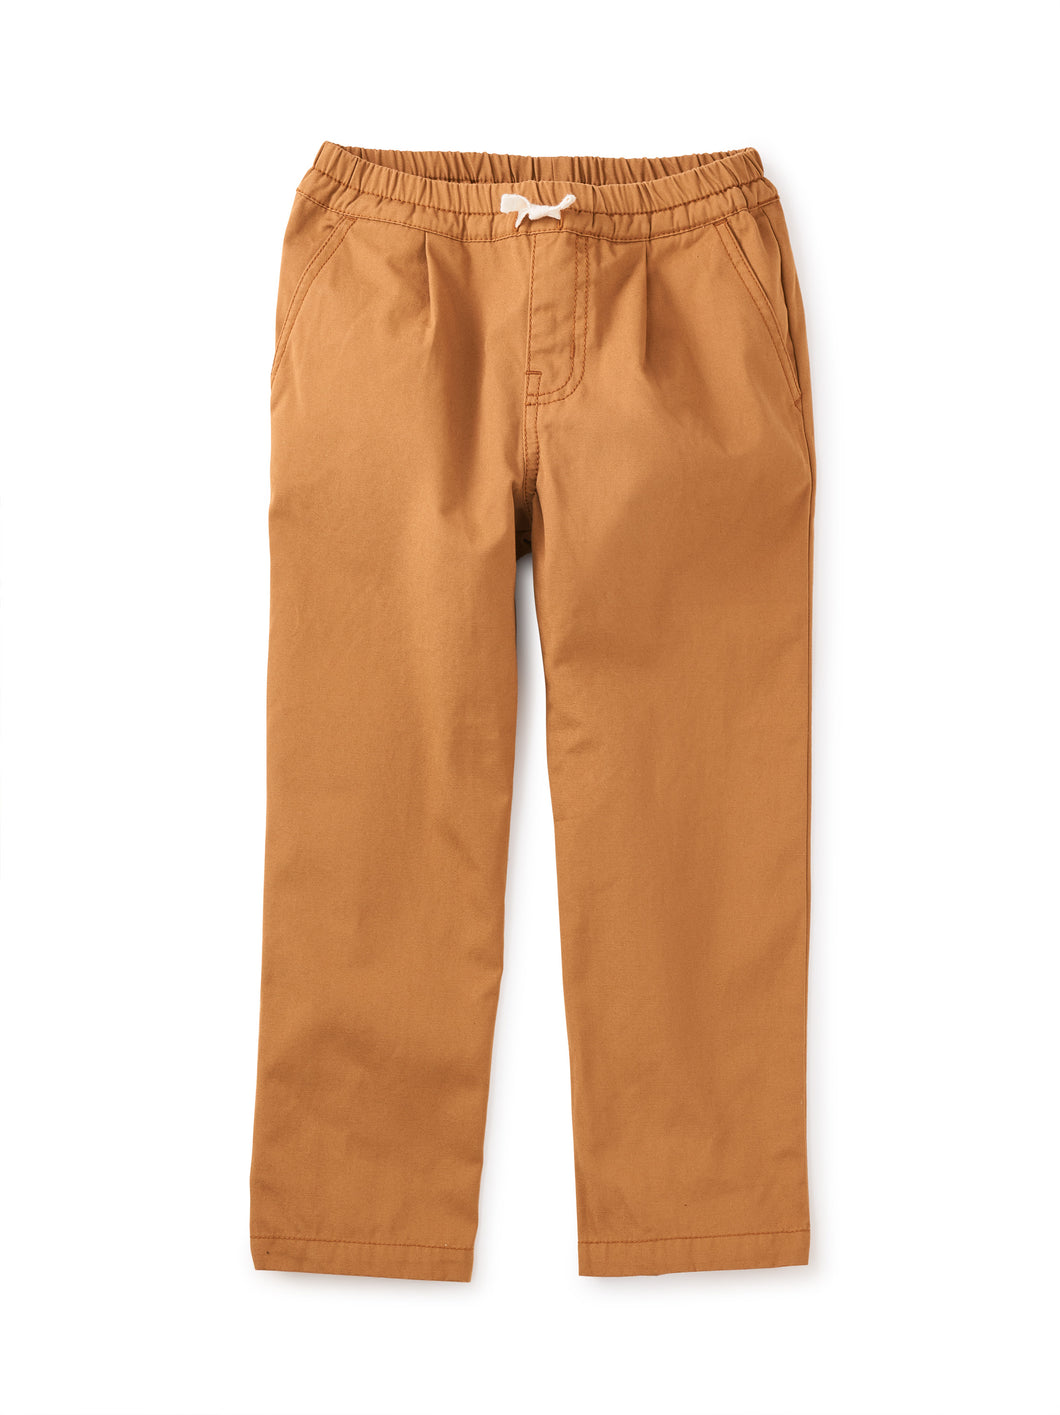 Tea Collection Pull-On Trousers - Raw Umber